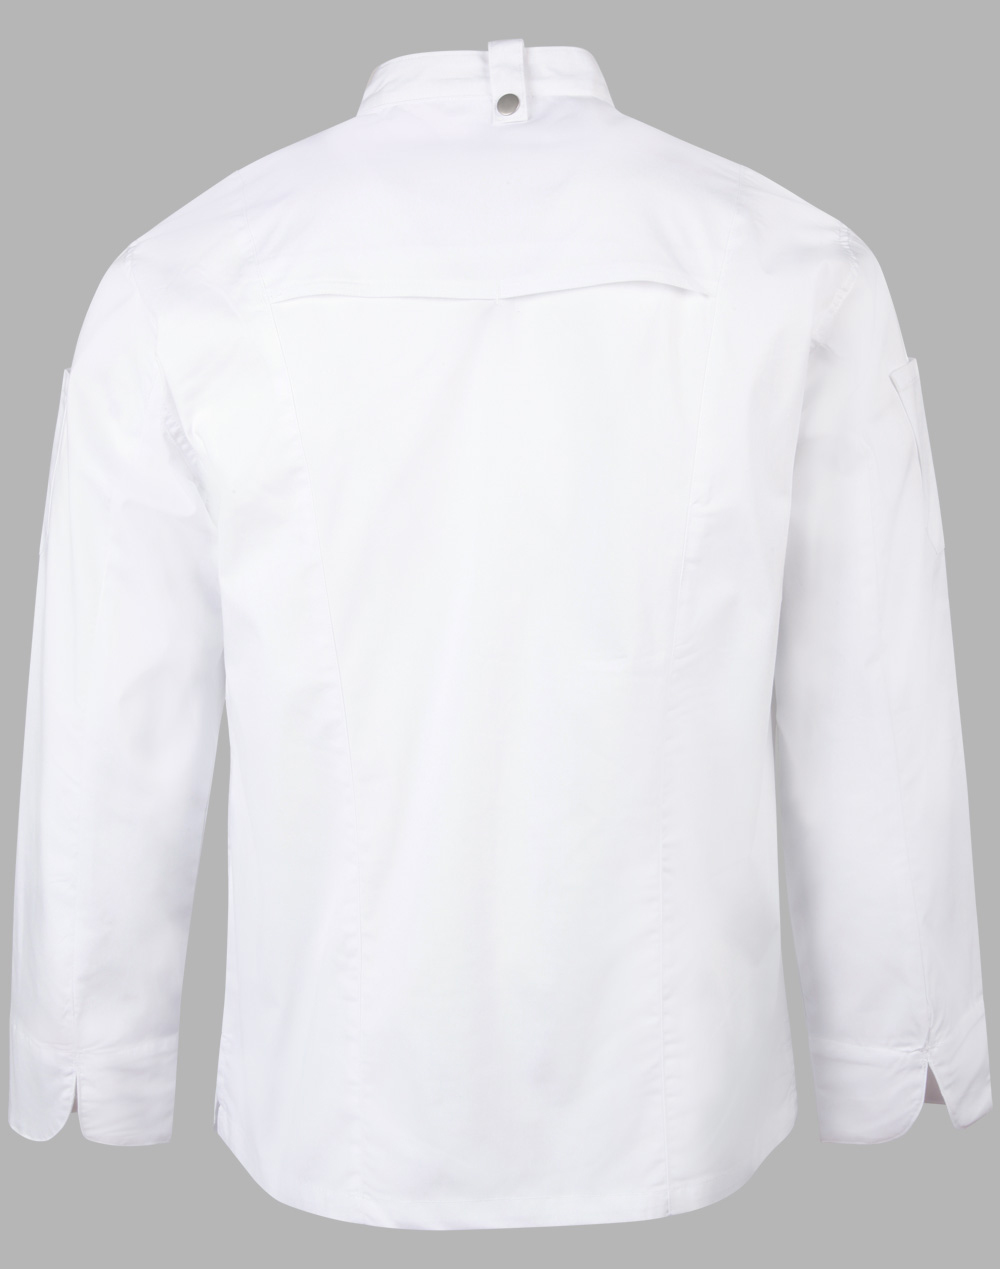 CJ03 MENS FUNCTIONAL CHEF JACKETS - Promote Your Brand